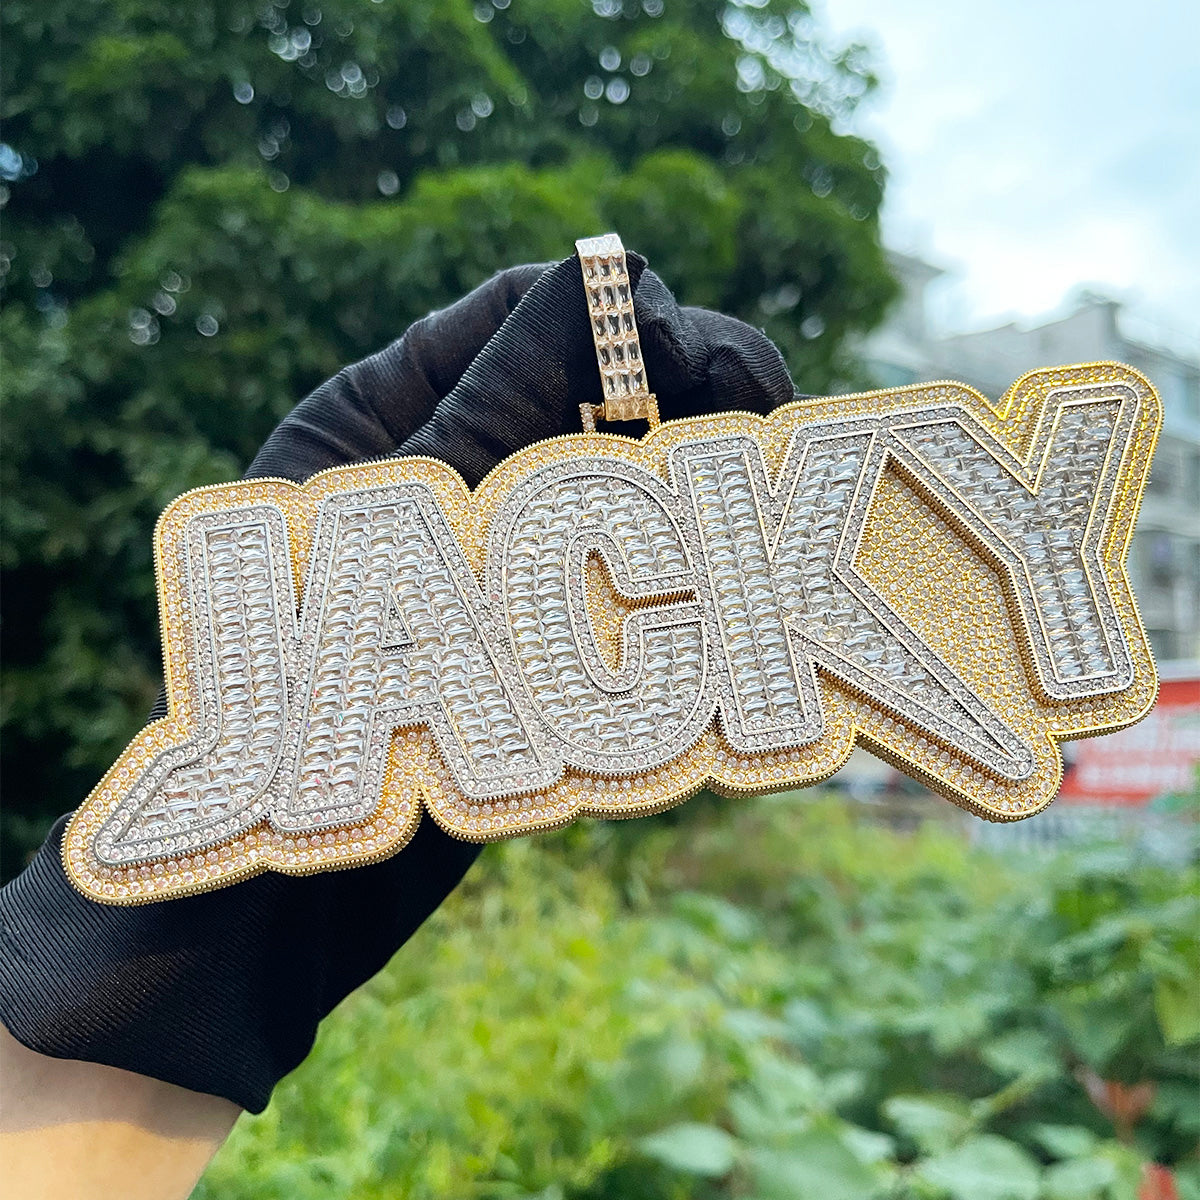 BIGGEST DESIGN v New Launch Customized Iced Out Hip Hop Pendant